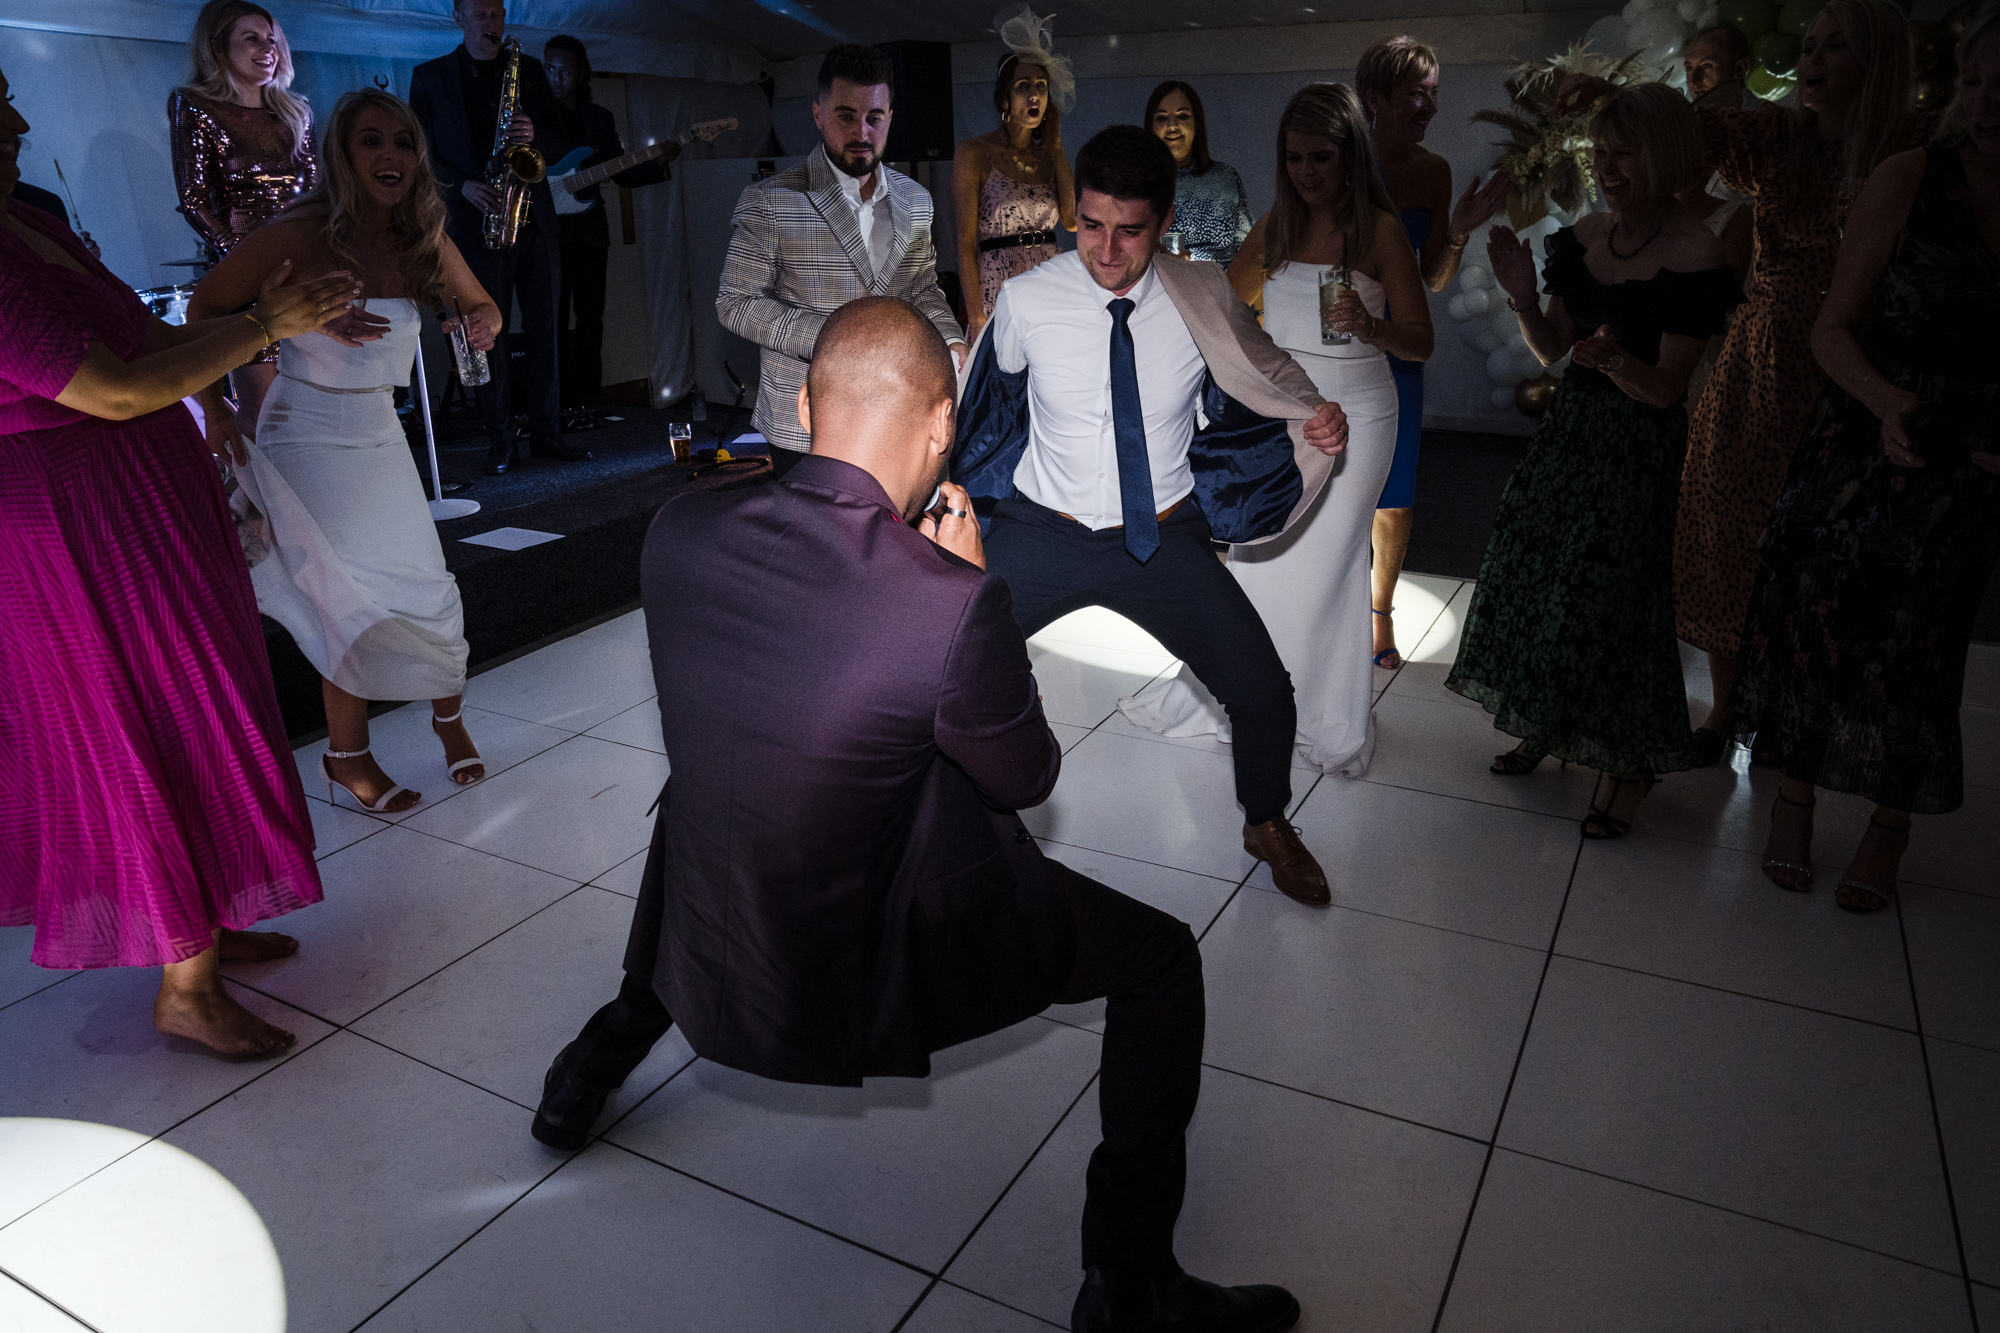 apollo soul singer Dom Hartley dancing and singing in the middle of the dance floor with wedding guest